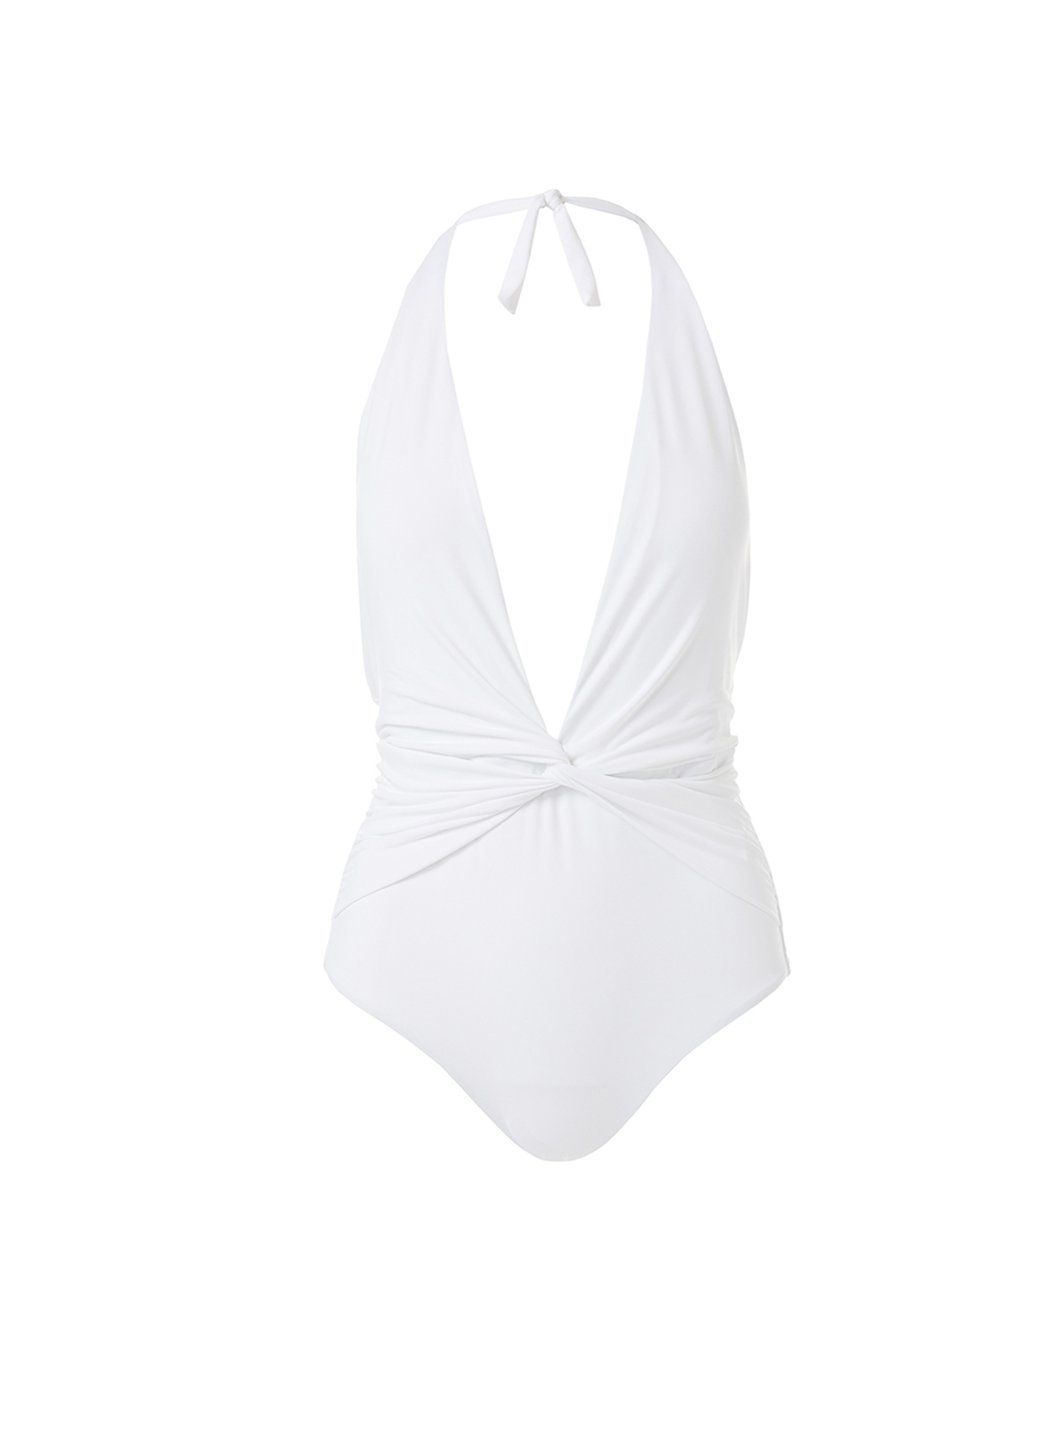 Sunflair Opera Pretty Plunge One Piece Swimsuit – White (Style